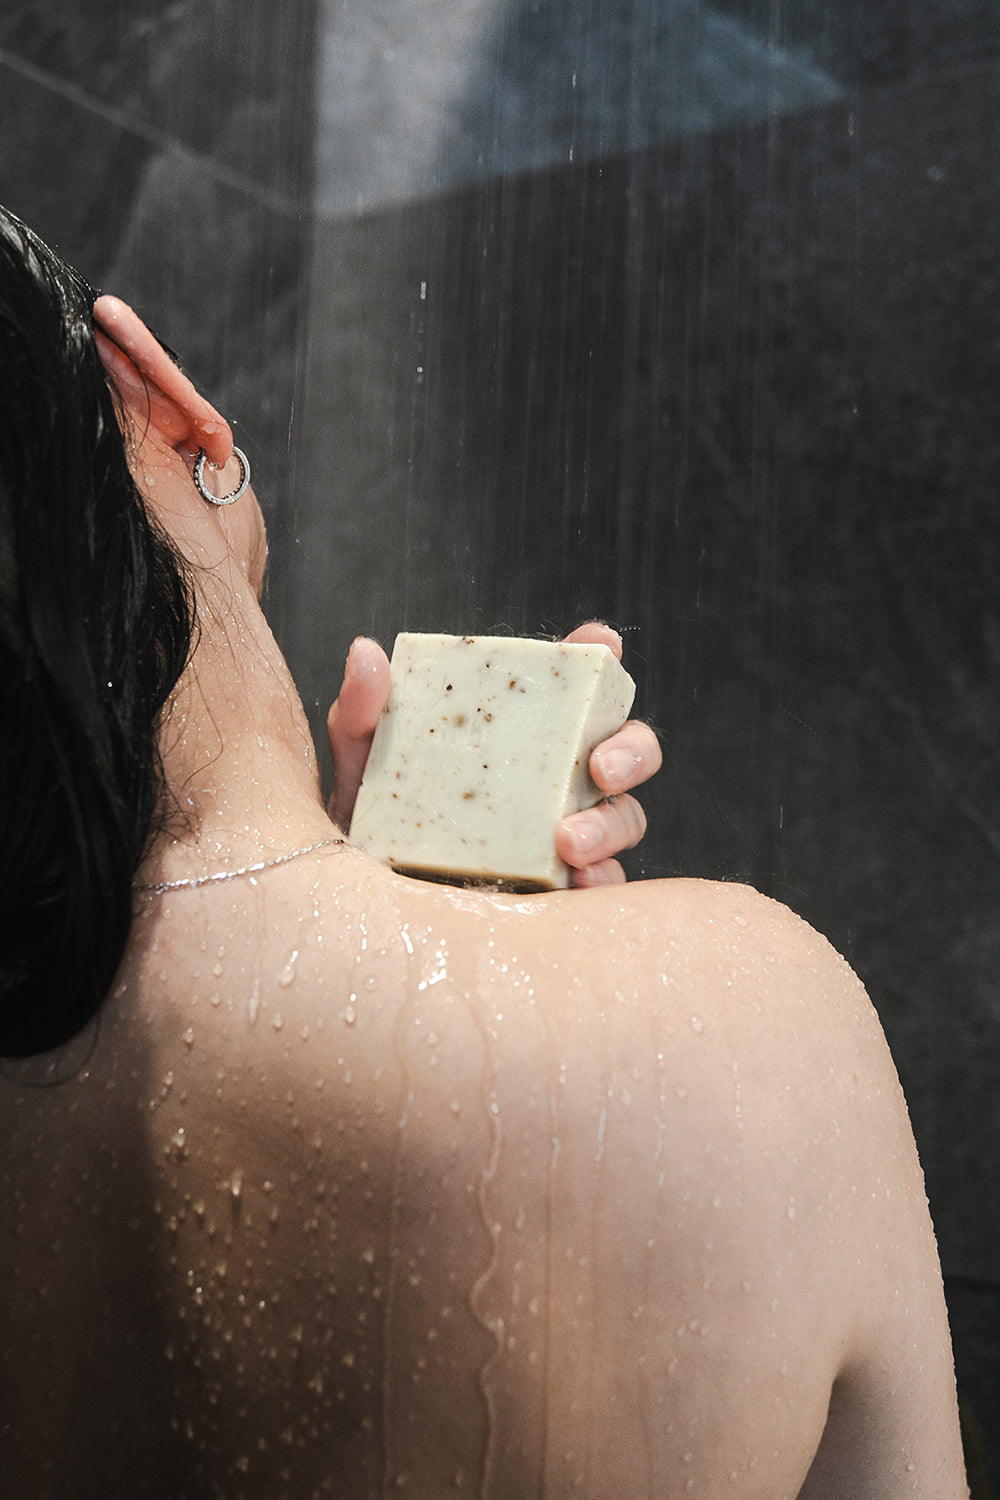 Weirli's Rice and Black Pepper Soap Square in shower